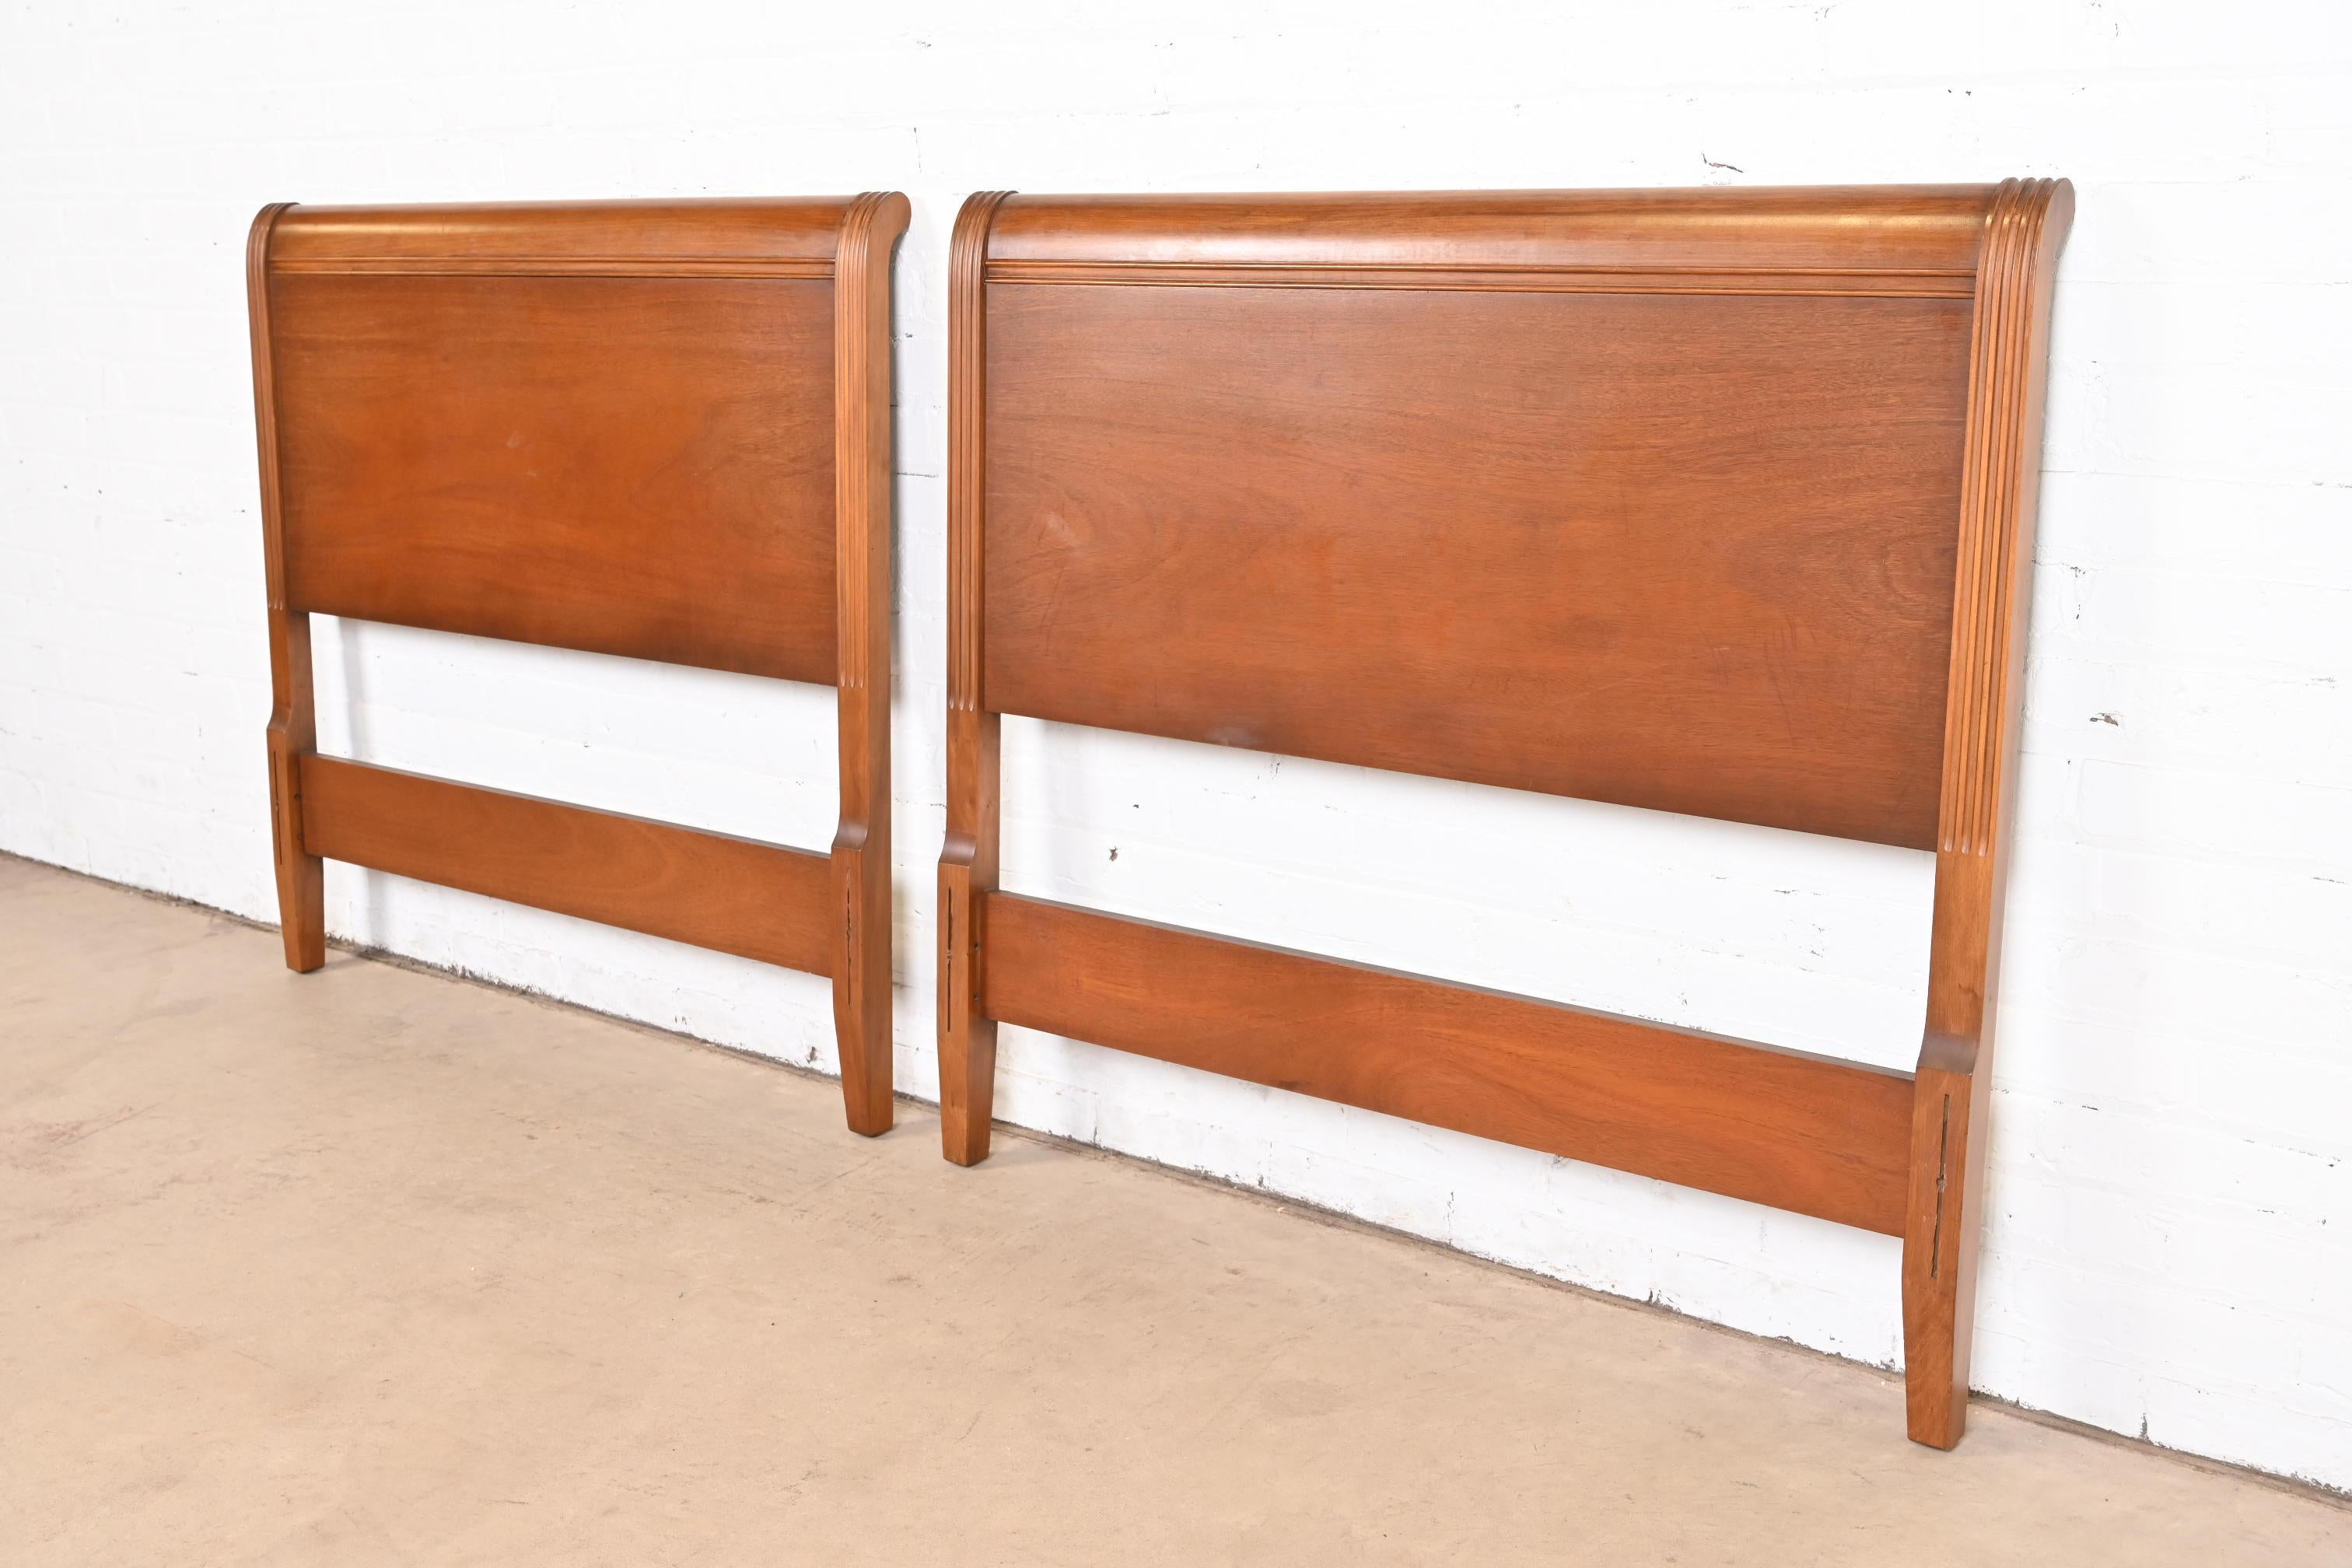 Drexel Regency Carved Mahogany Twin Headboards, Pair In Good Condition For Sale In South Bend, IN